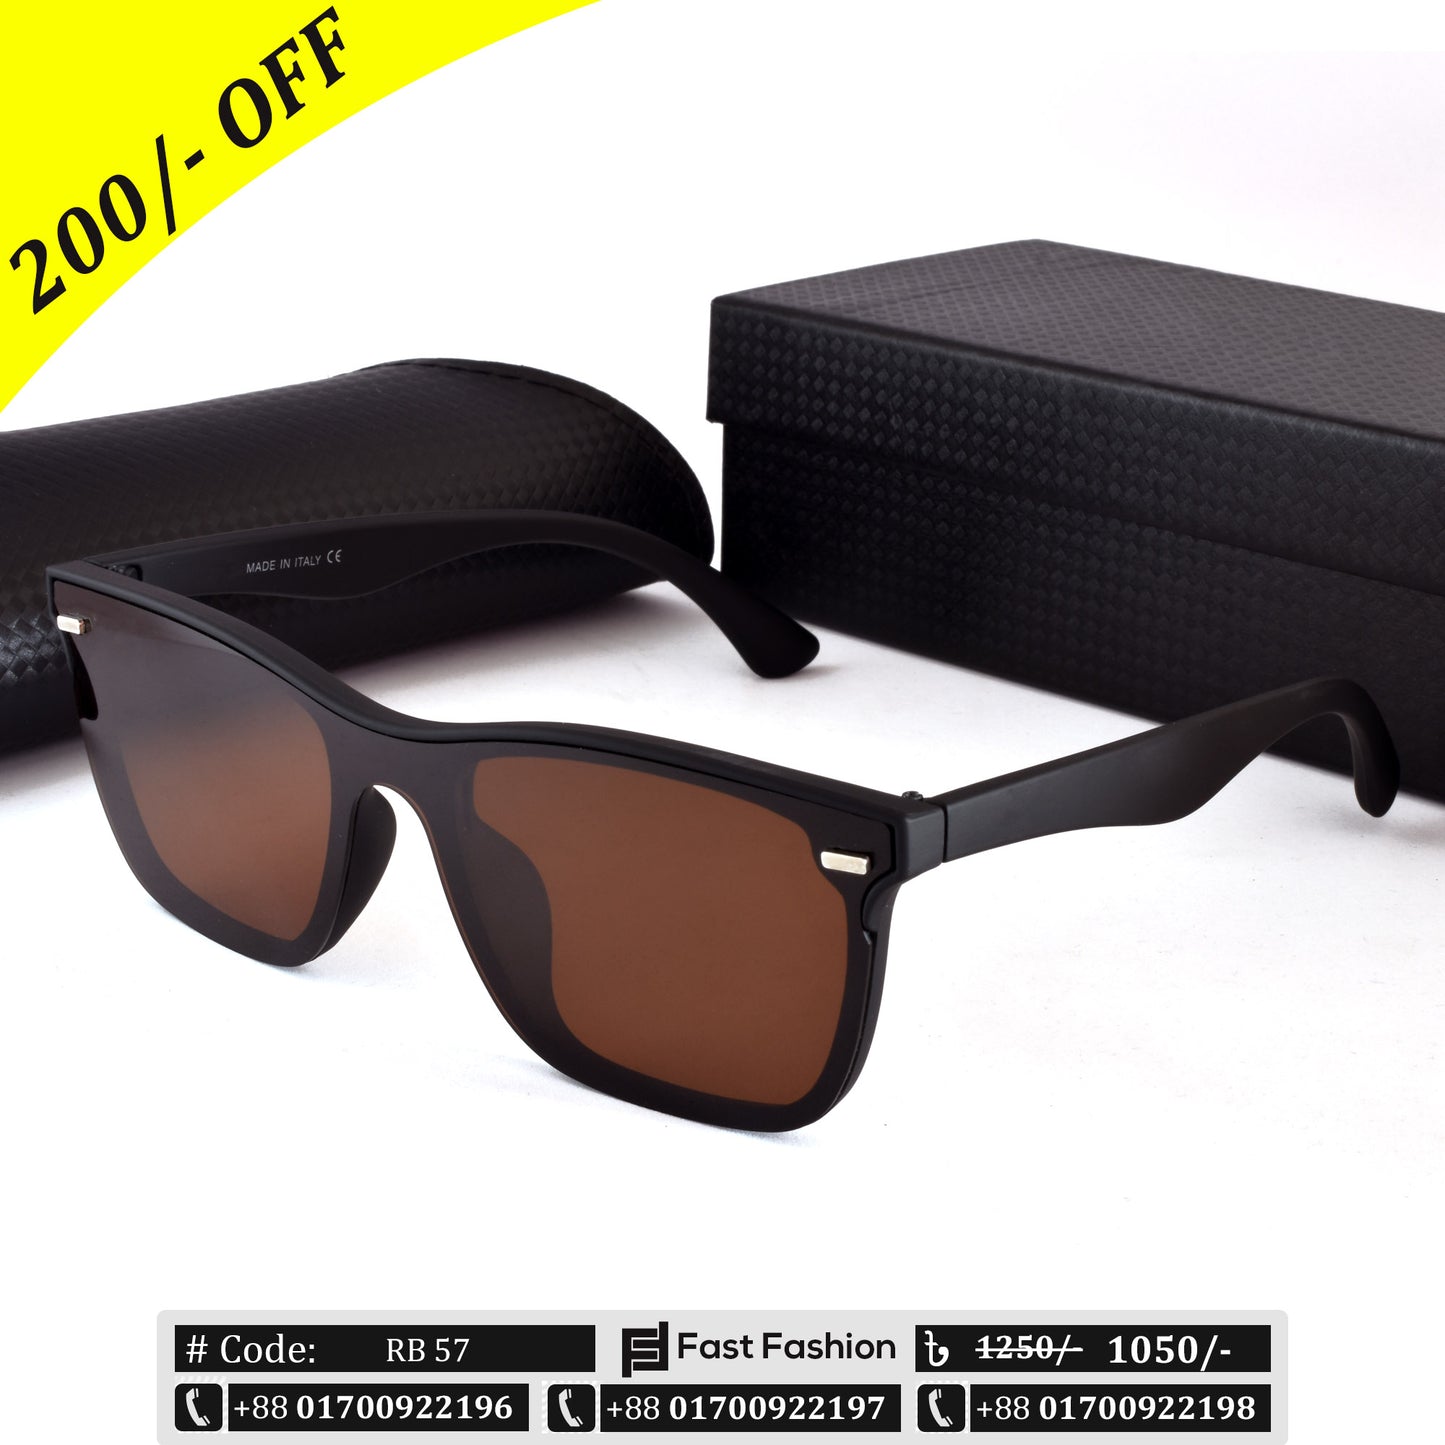 Trendy Stylish Cool Looking Sunglass for Men | RB 57 | Online Sunglass in Bangladesh